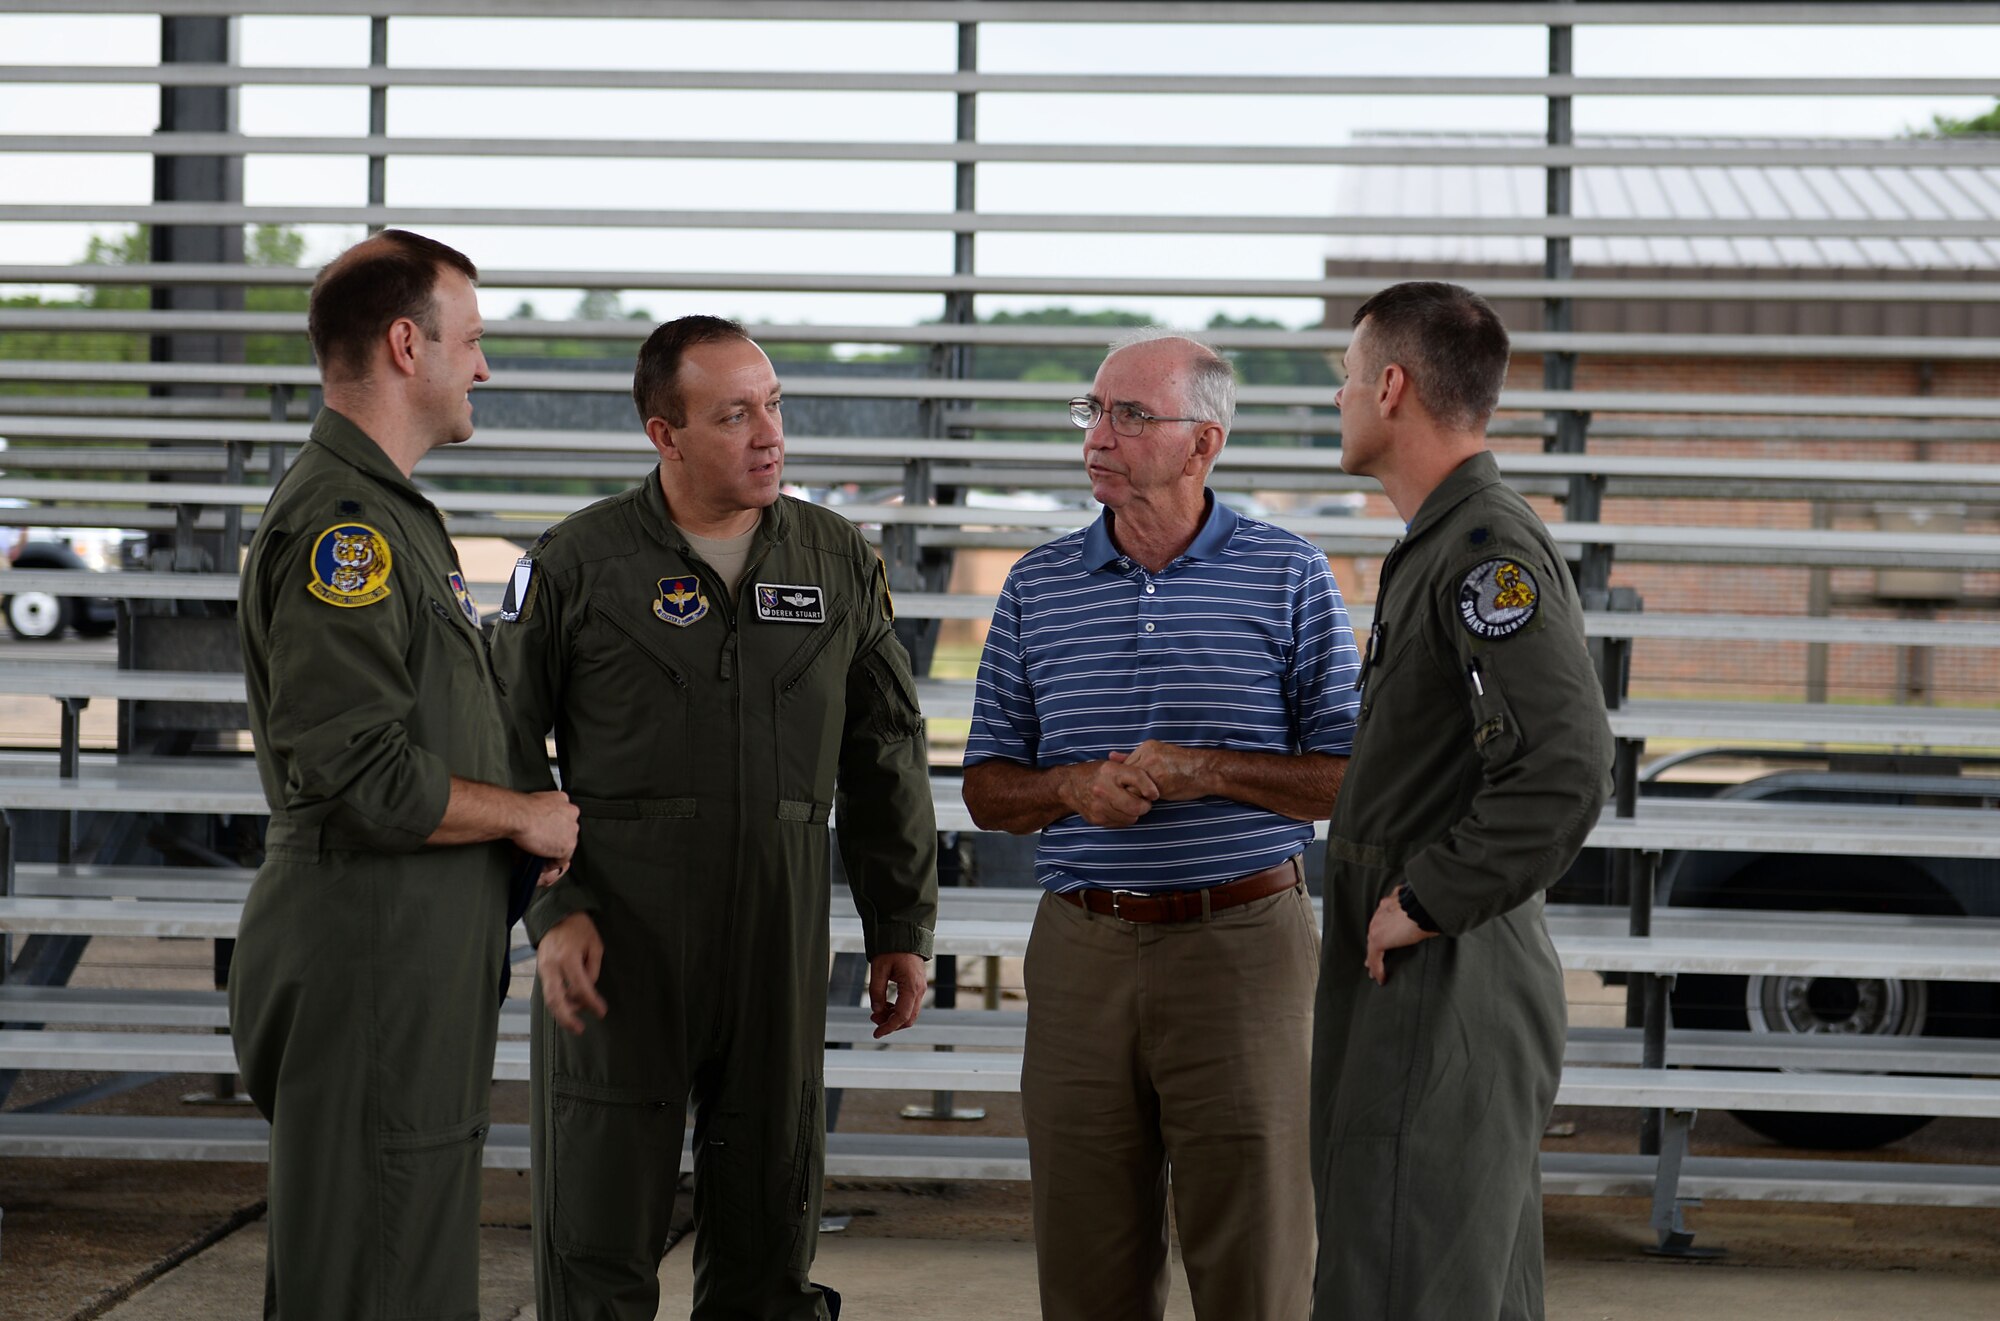 Retired Col. James Donnelly, Undergraduate Pilot Training class 71-01 graduate speaks with 14th Operations Group leadership July 3, 2019, on Columbus Air Force Base, Miss. Five Classmates from the 71-01 class visited Columbus AFB 50 years after their pilot training began and attended the 50th Flying Training Squadron’s heritage aircraft unveiling. (U.S. Air Force photo by Airman 1st Class Hannah Bean)